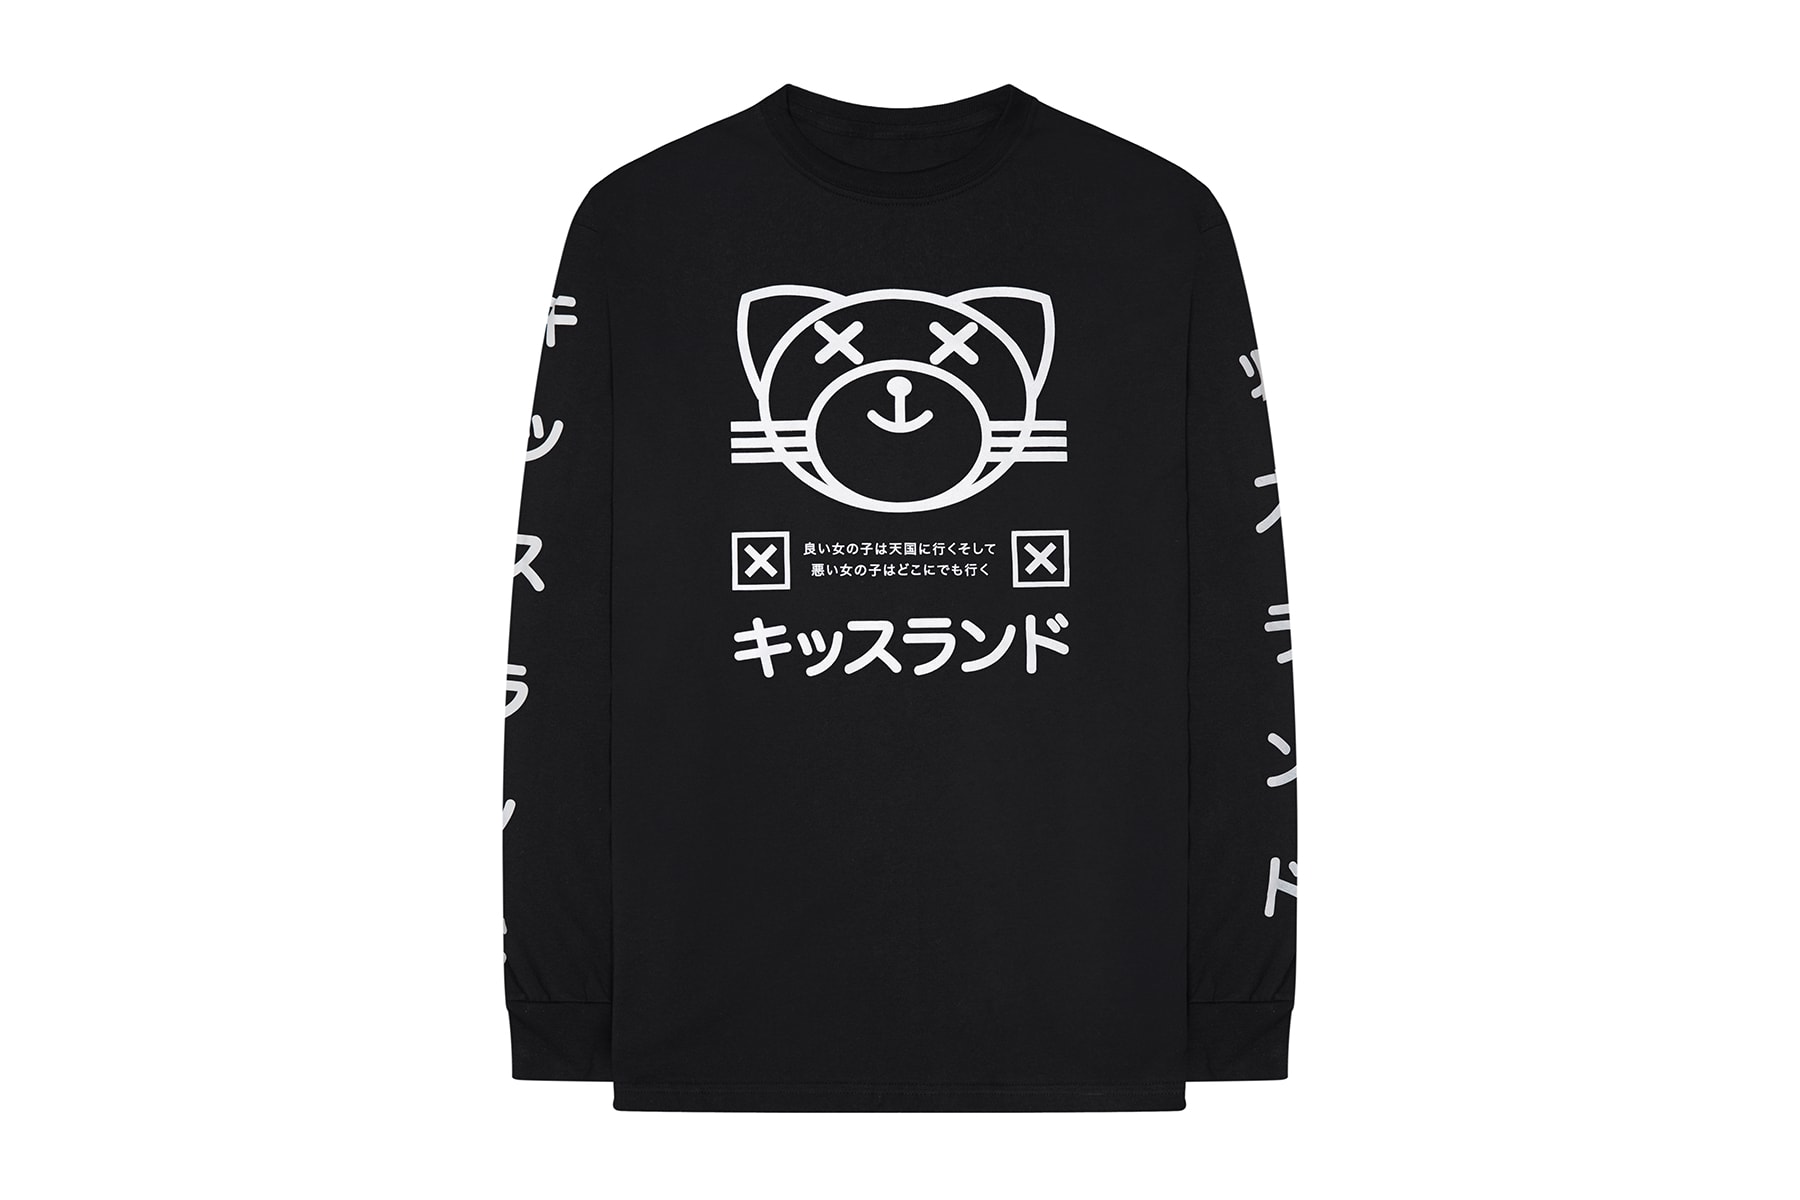 The Weeknd kiss land 5 anniversary drop release date web store release date info september 10 2018 closer look limited edition red panda fox character bearbrick figure vinyl medicom toy hoodie tee shirt face mask hat